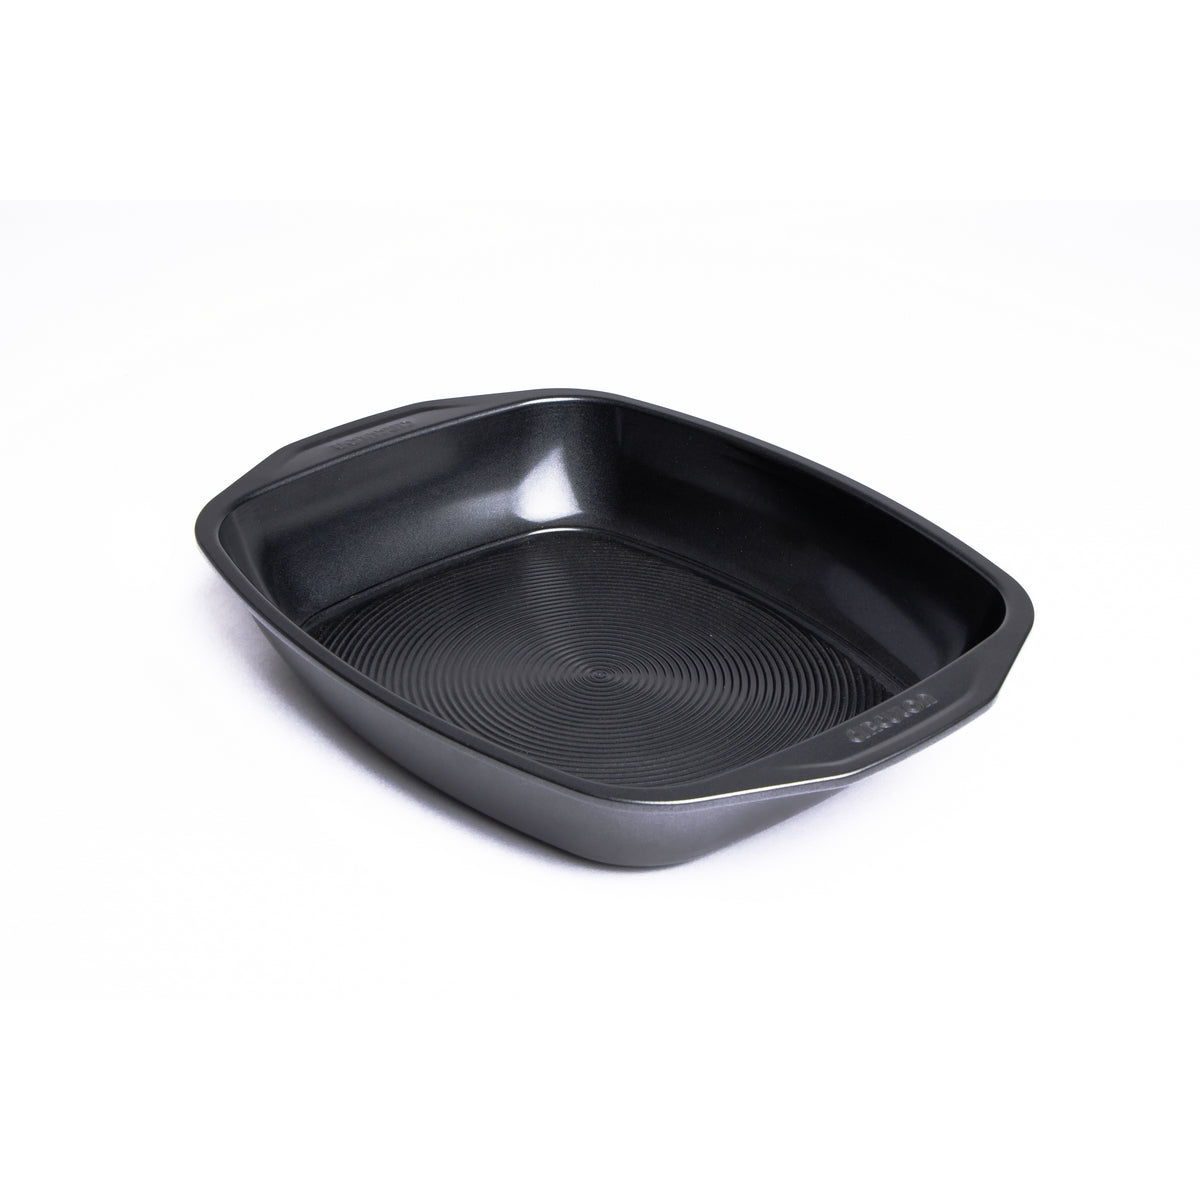 Ultimum non-stick 5 piece bakeware set from Circulon comes with a lifetime guarantee